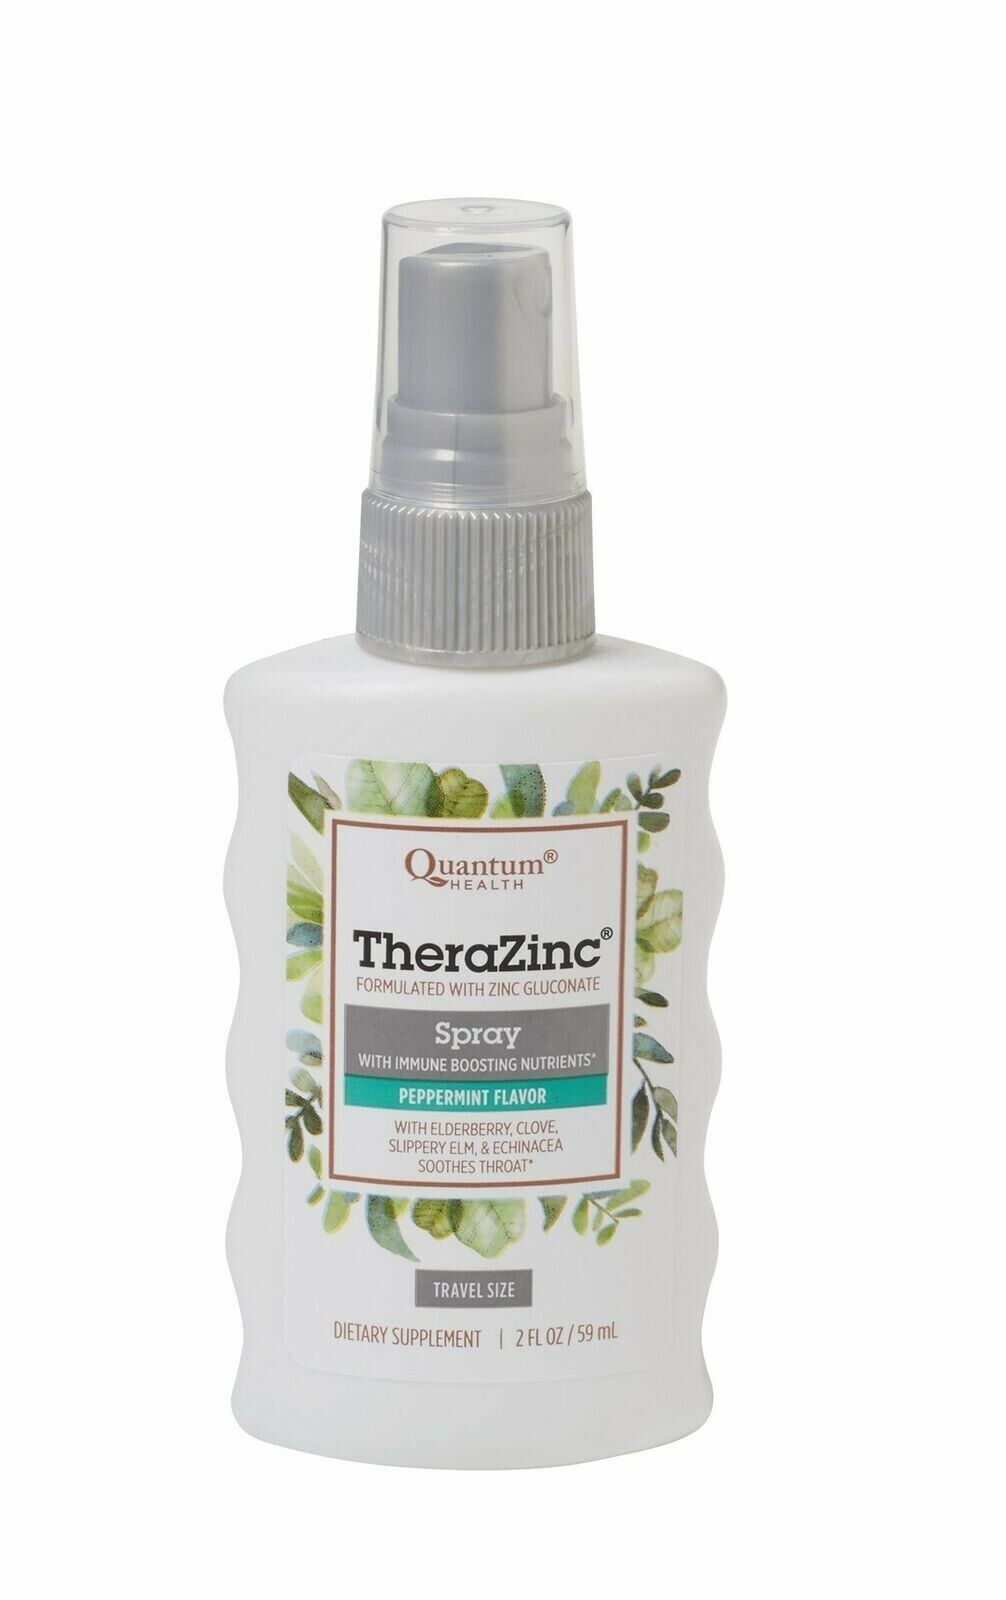 Quantum Health TheraZinc Oral Spray, Made with Zinc Gluconate for Immune Supp... - $11.64